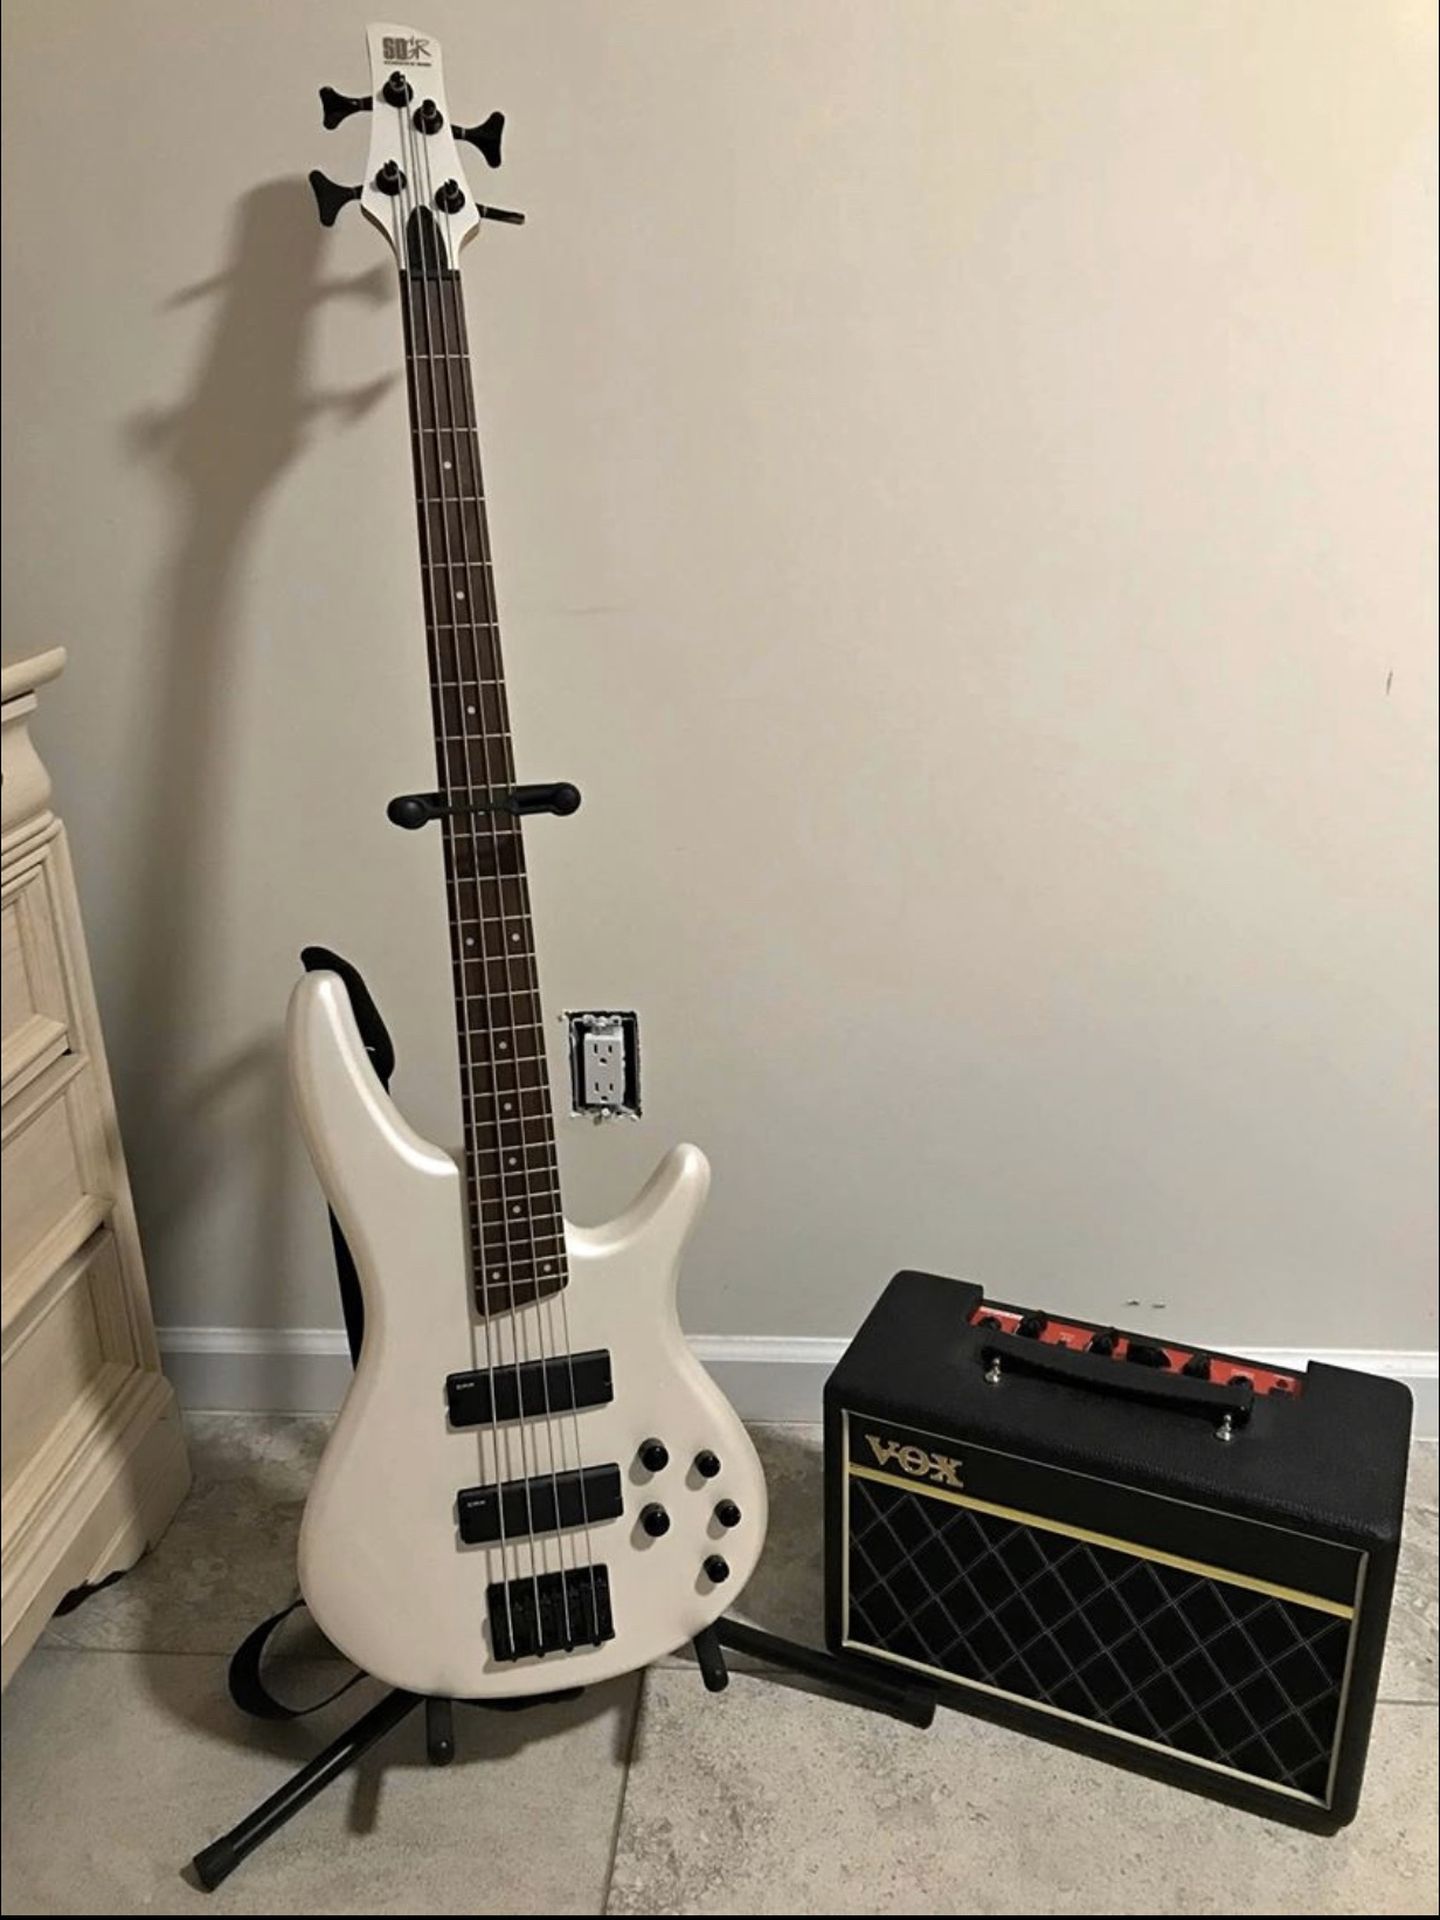 Bass guitar and speakers